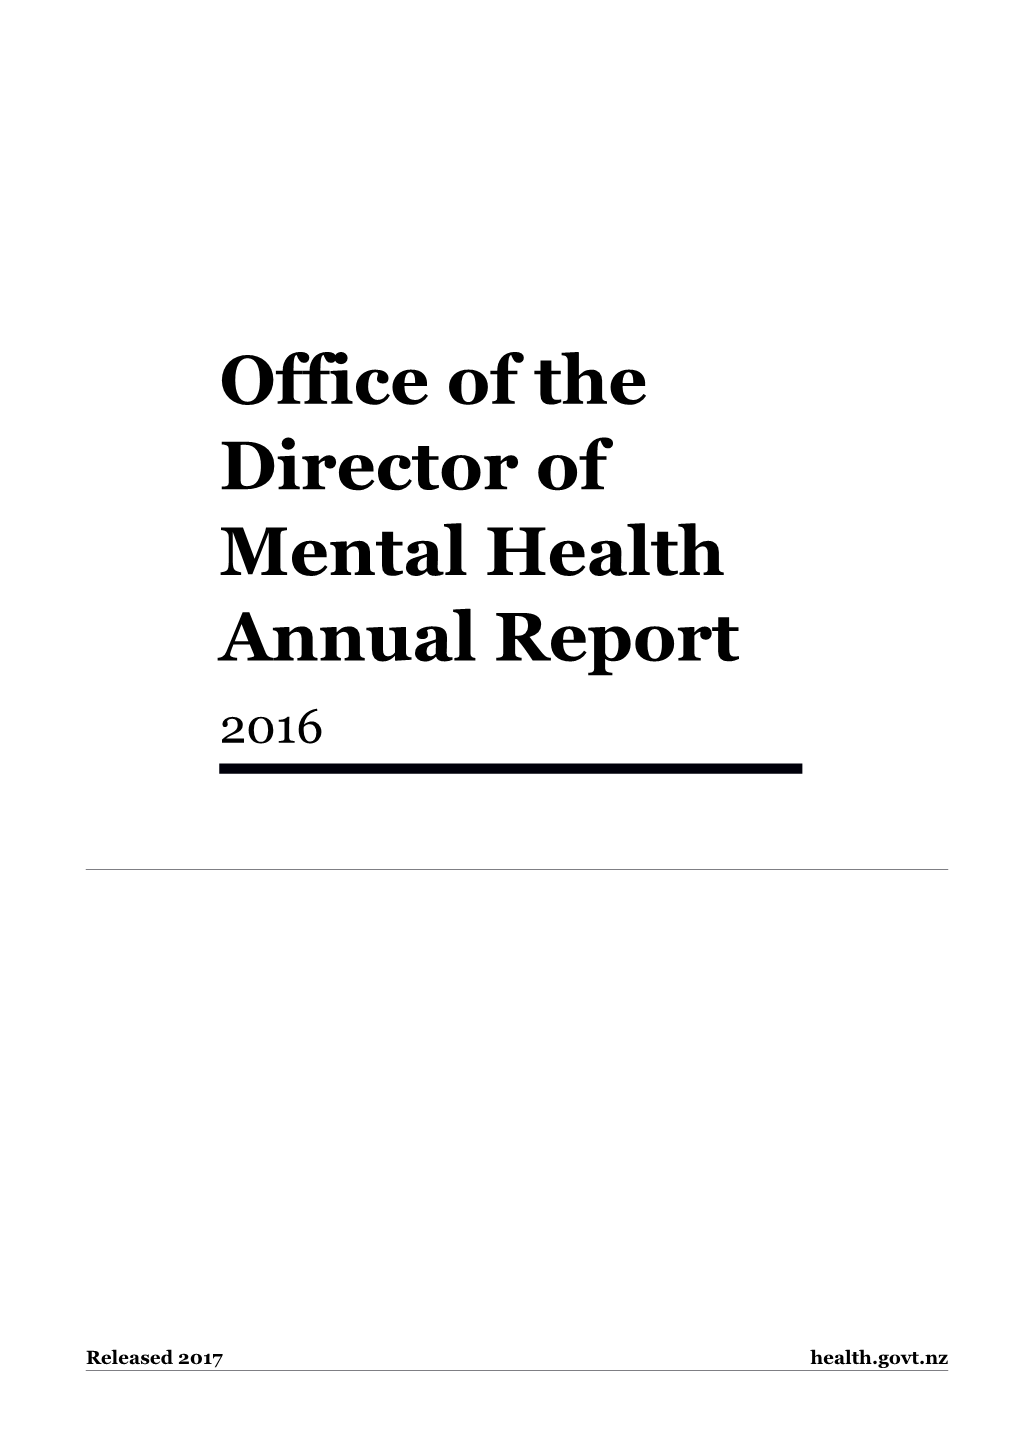 Office of the Director of Mental Health Annual Report 2016